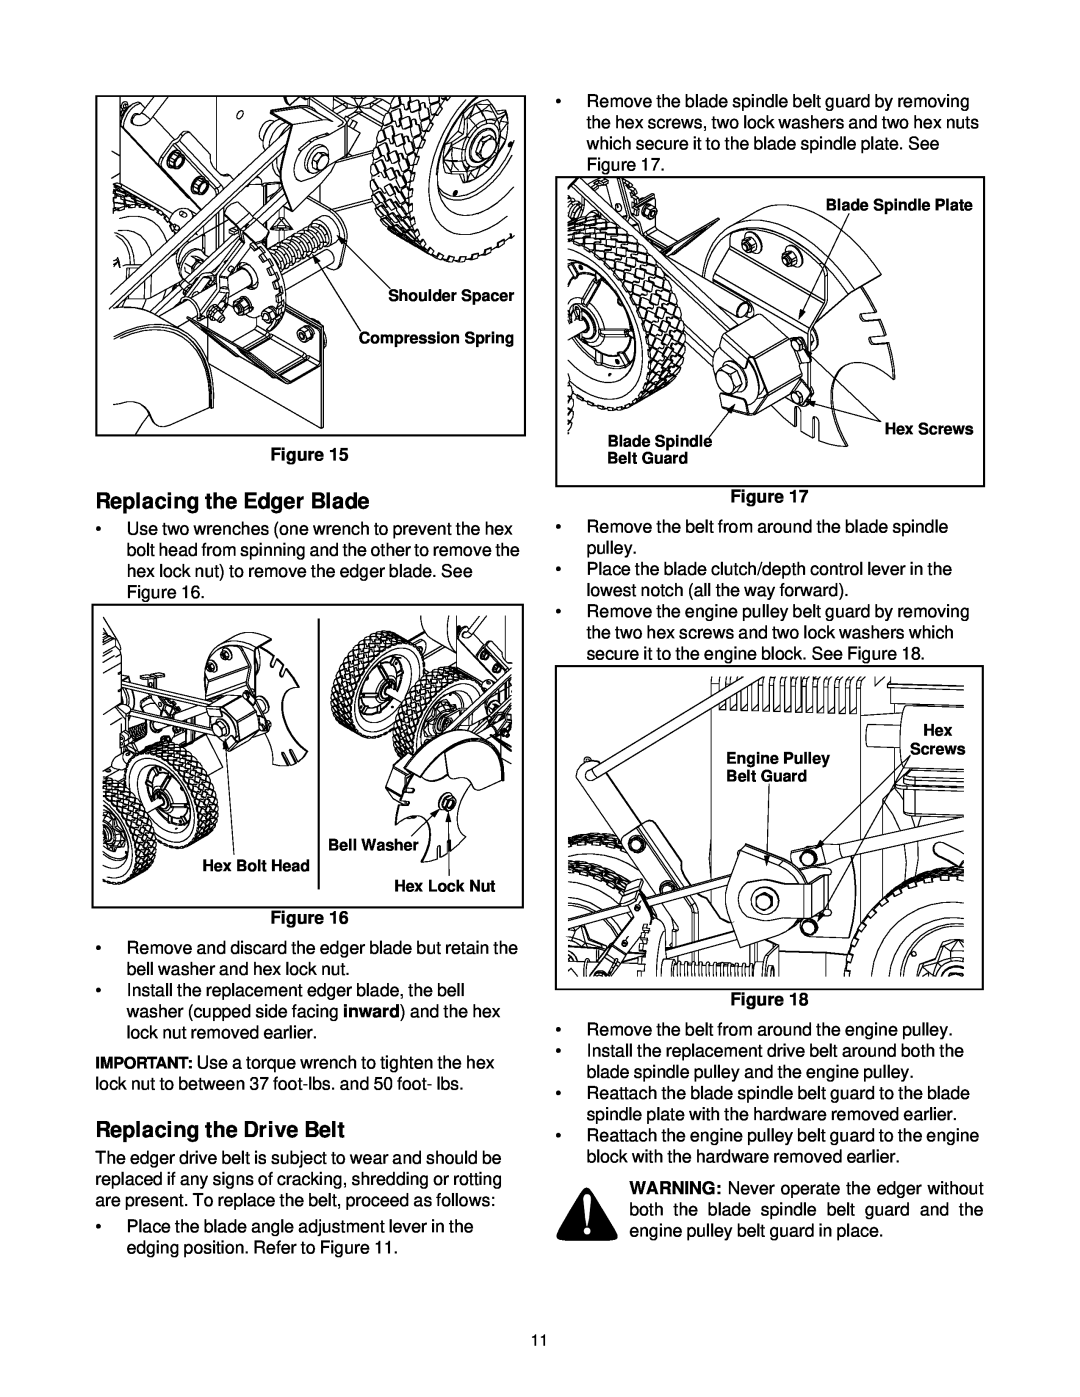 Briggs & Stratton 592 manual Replacing the Edger Blade, Replacing the Drive Belt 